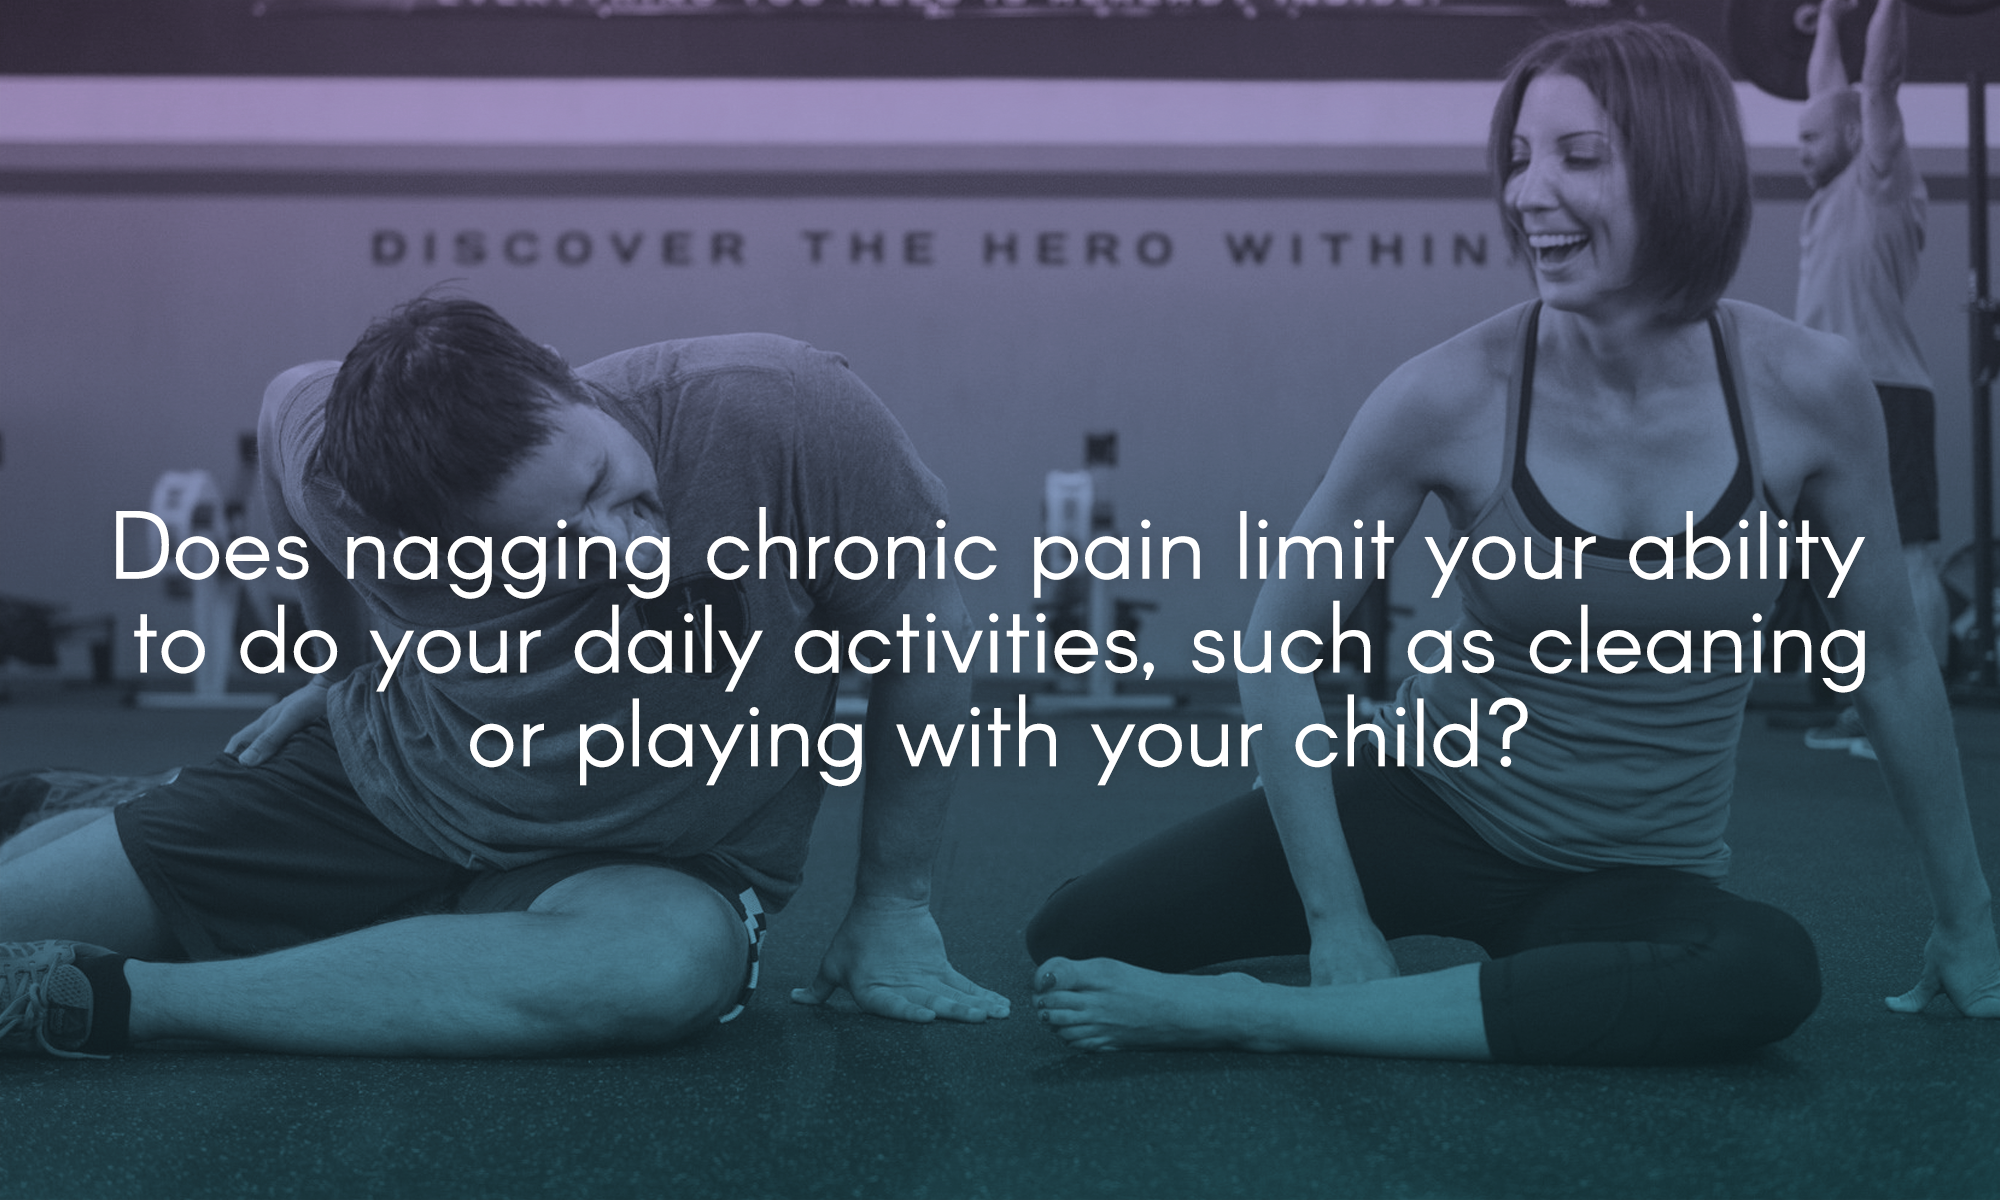  Does nagging chronic pain limit your ability to do your daily activities, such as cleaning or playing with your child? 